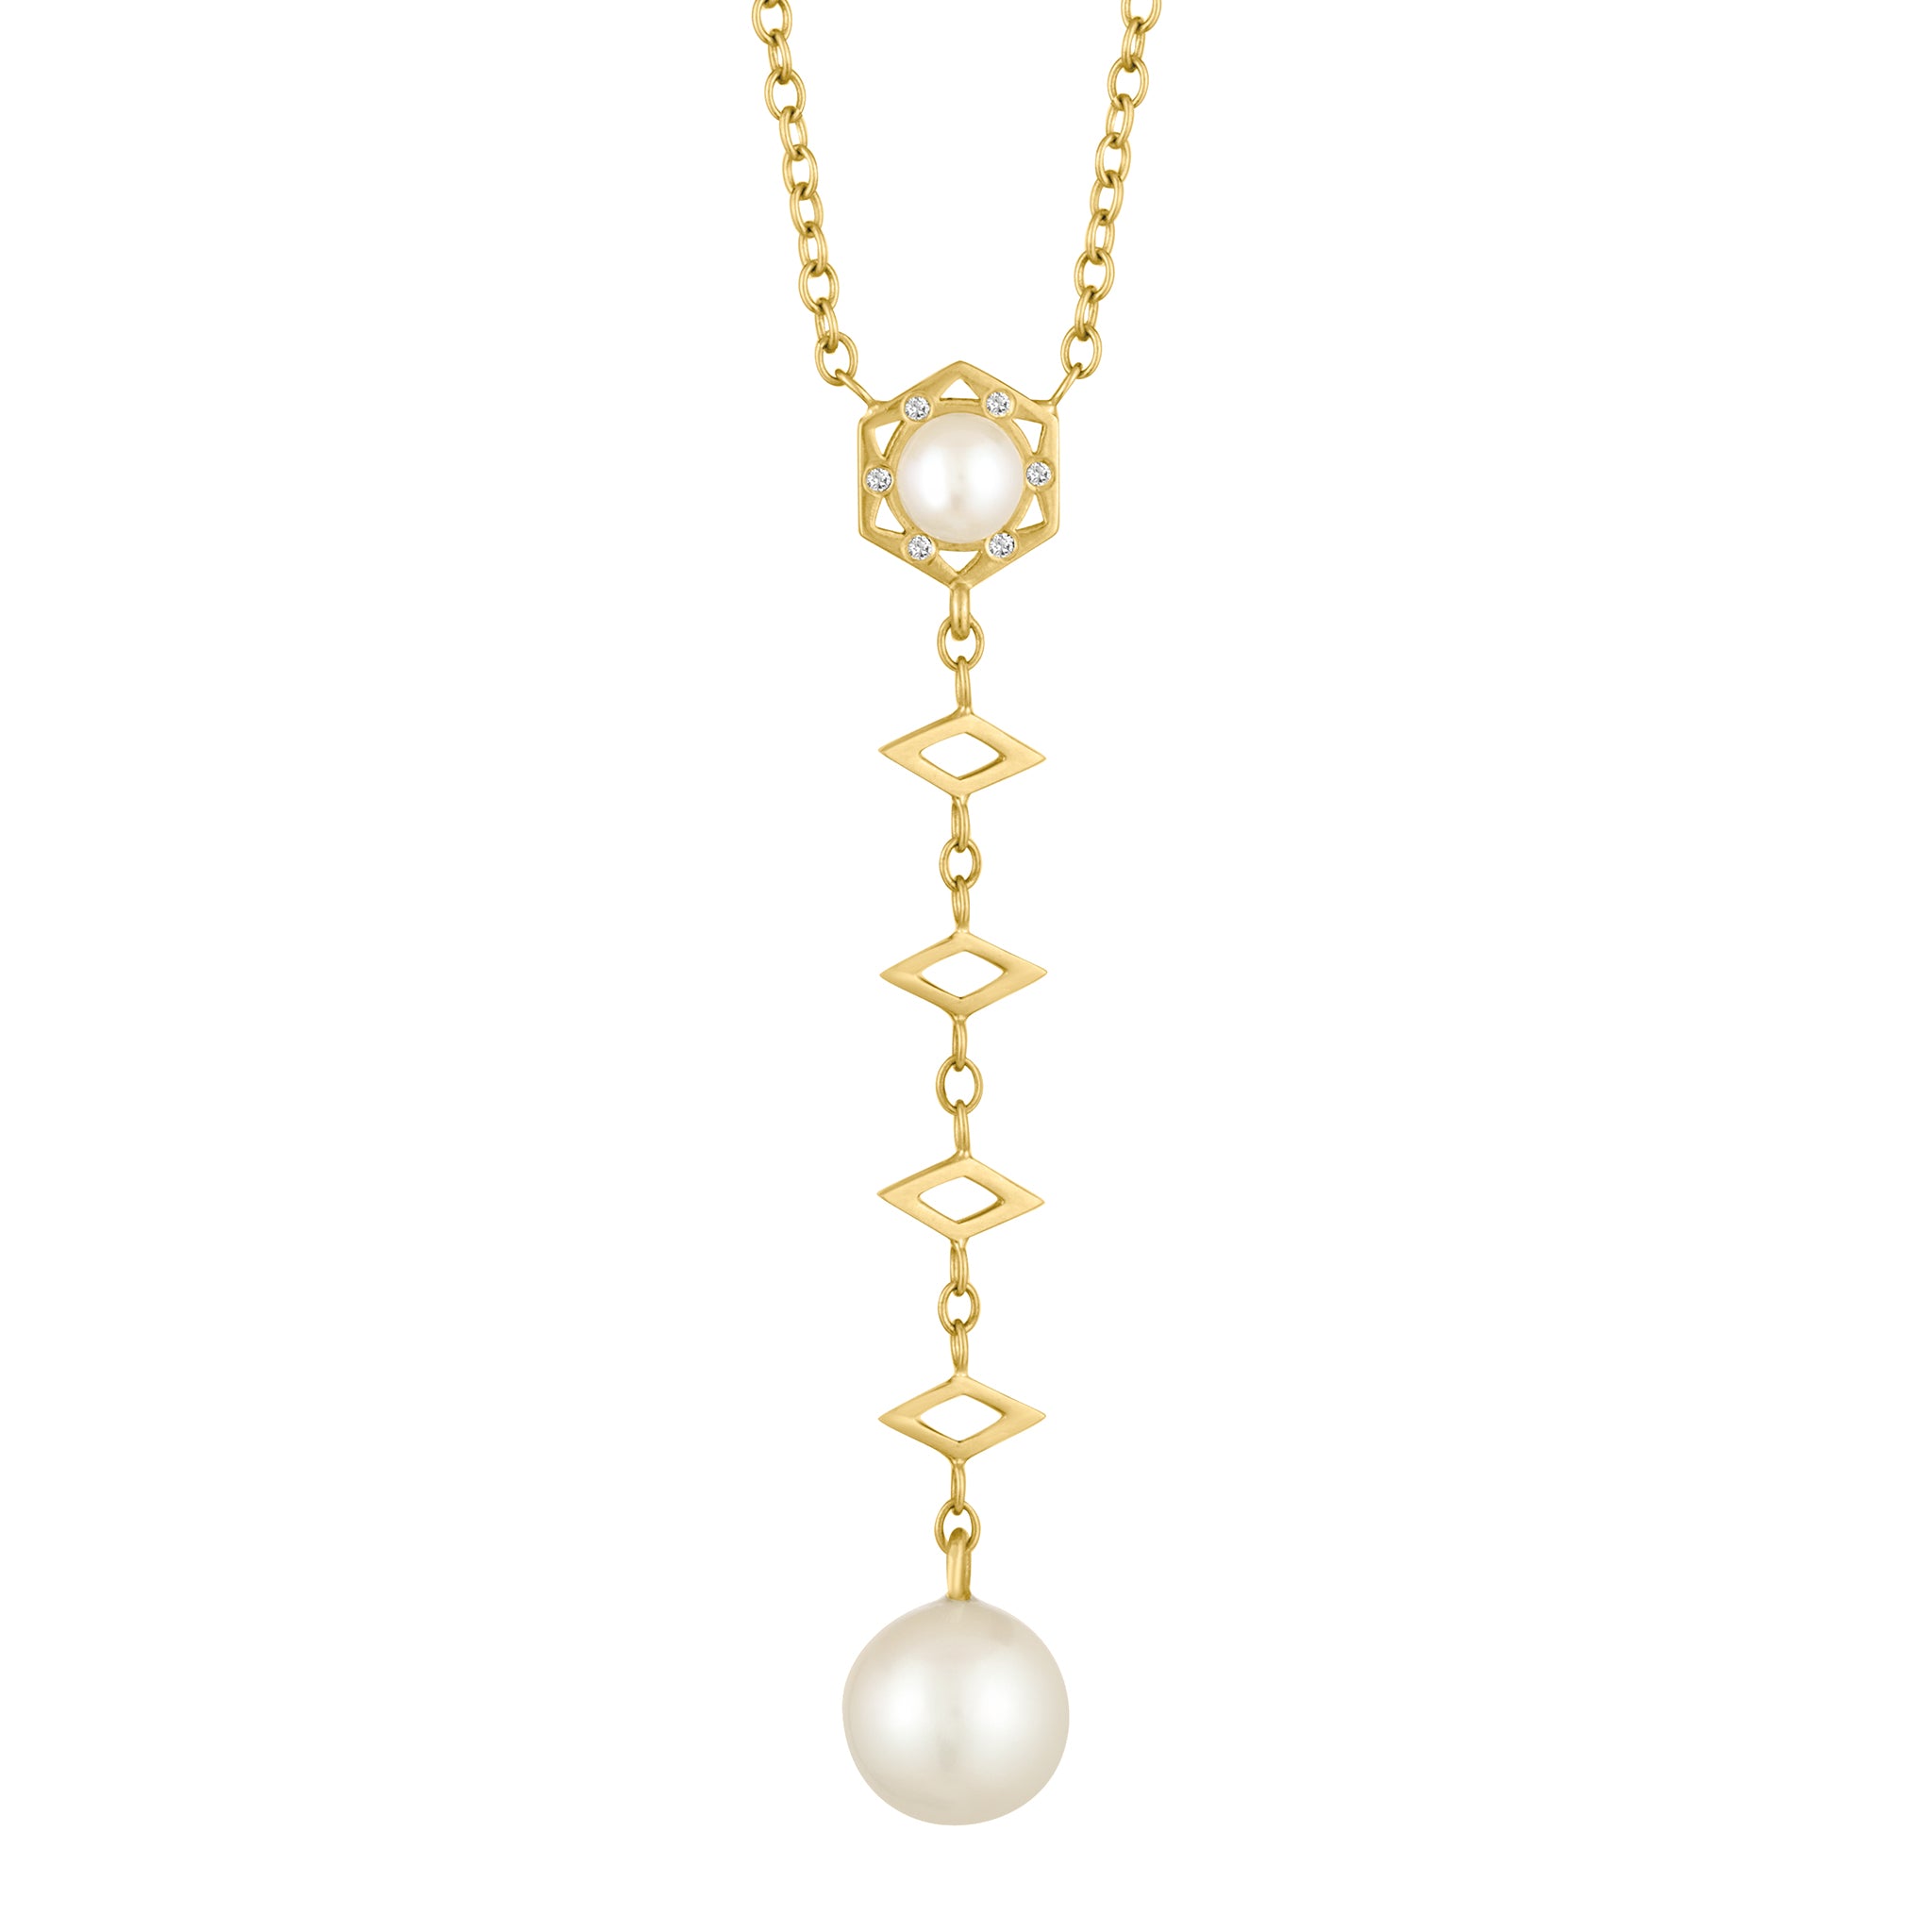 Cosmo Pearl Lariat Long Necklace: 18k Gold, Diamonds, Pearl Drop